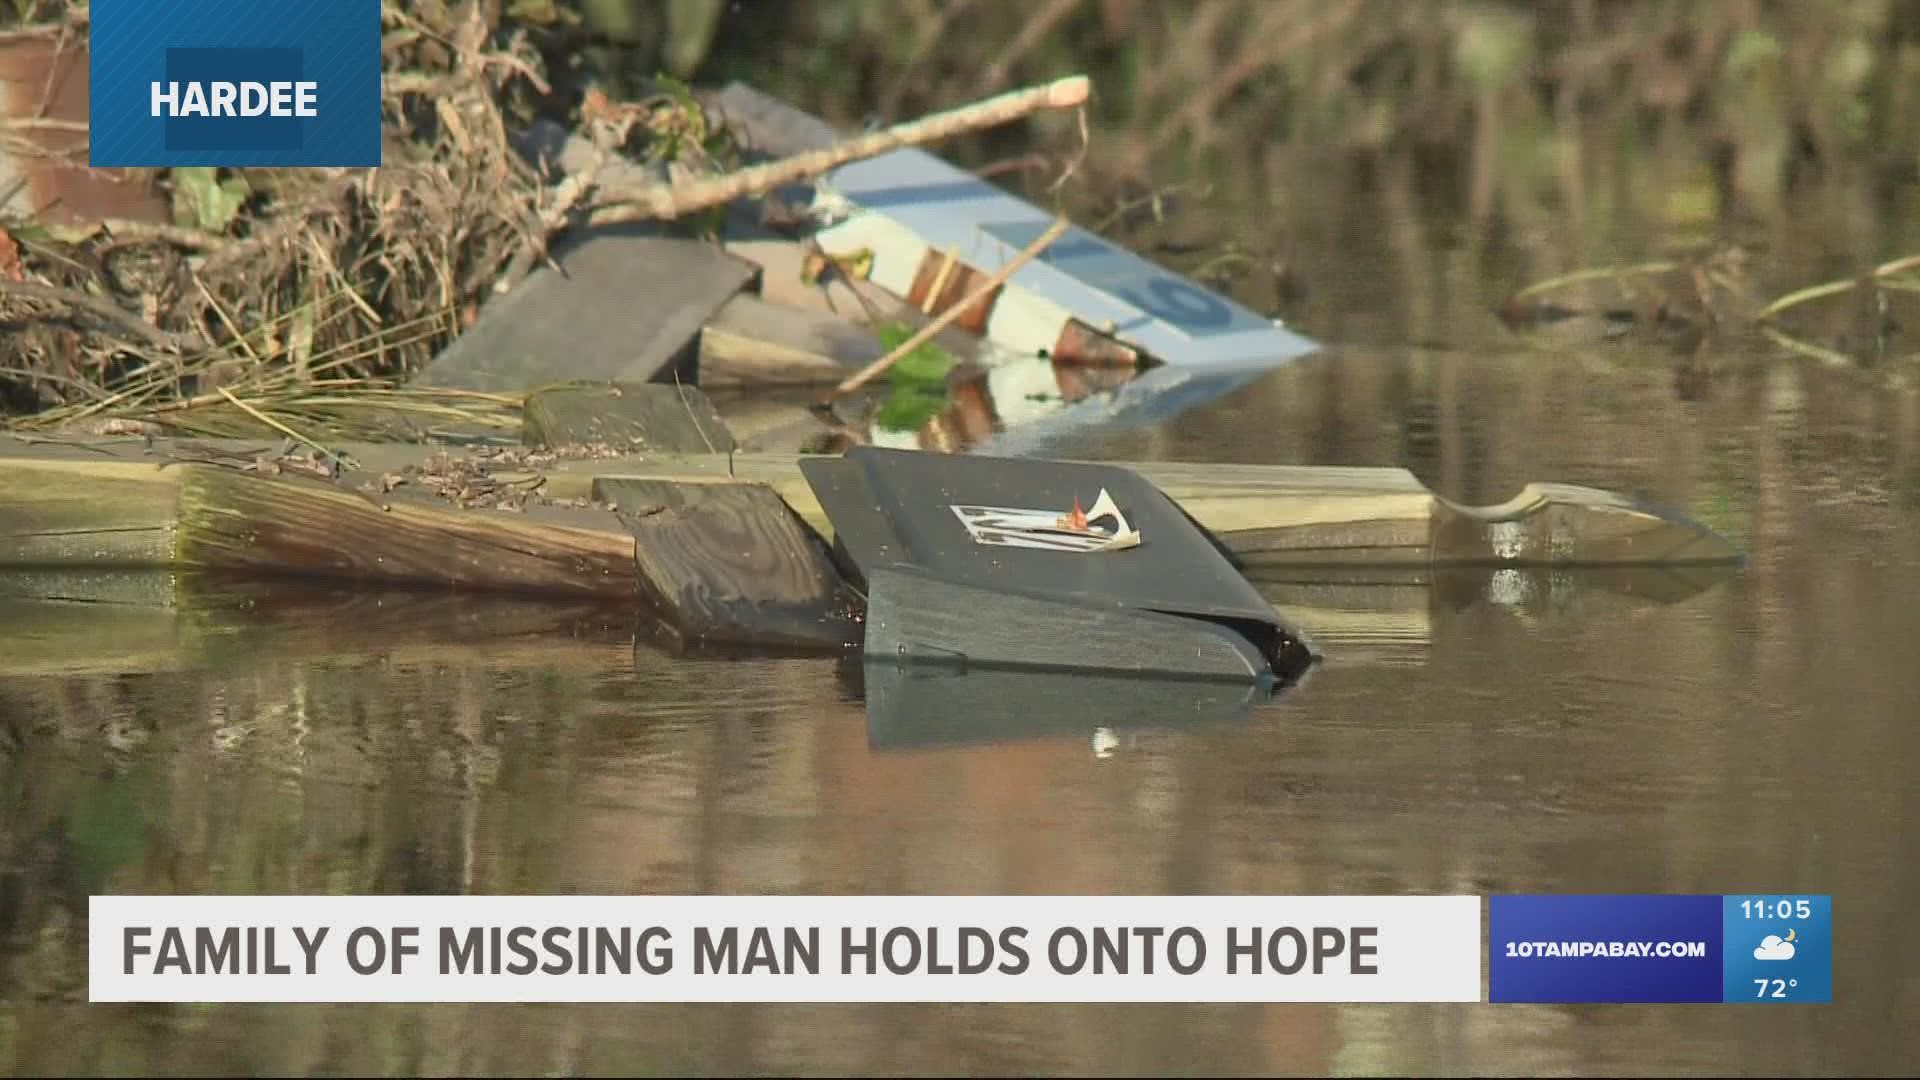 Craig Markgraff Jr. of Hardee County left his home in the middle of the storm to rescue his father.